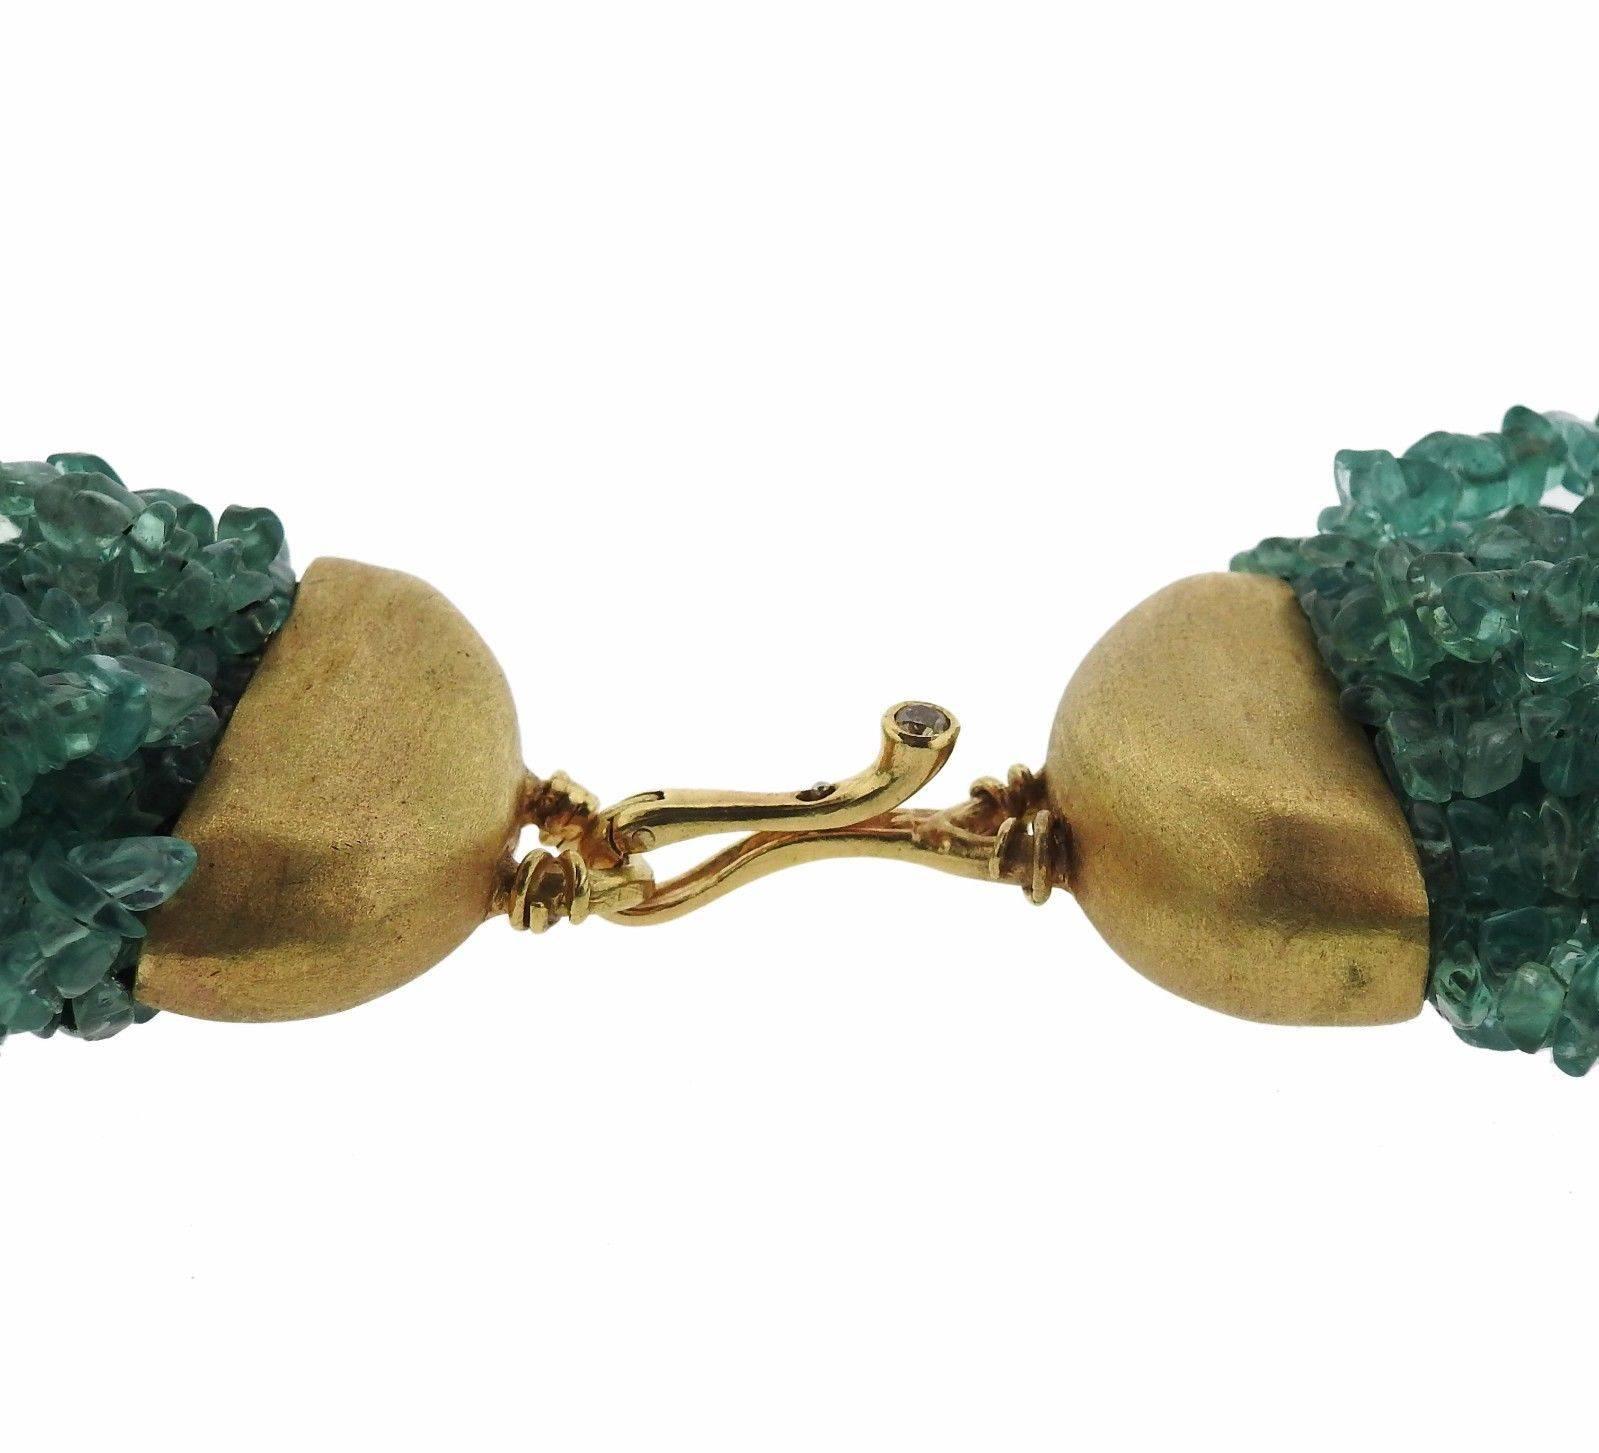 An 18K yellow gold multi stransd necklace set with seafoam green gemstone beads and  a fancy color diamond weighing approximately 0.12ct.  The necklace is 25" long and approx. 2" wide.  Marked: 750, Angela Pintaldi.  The weight of the